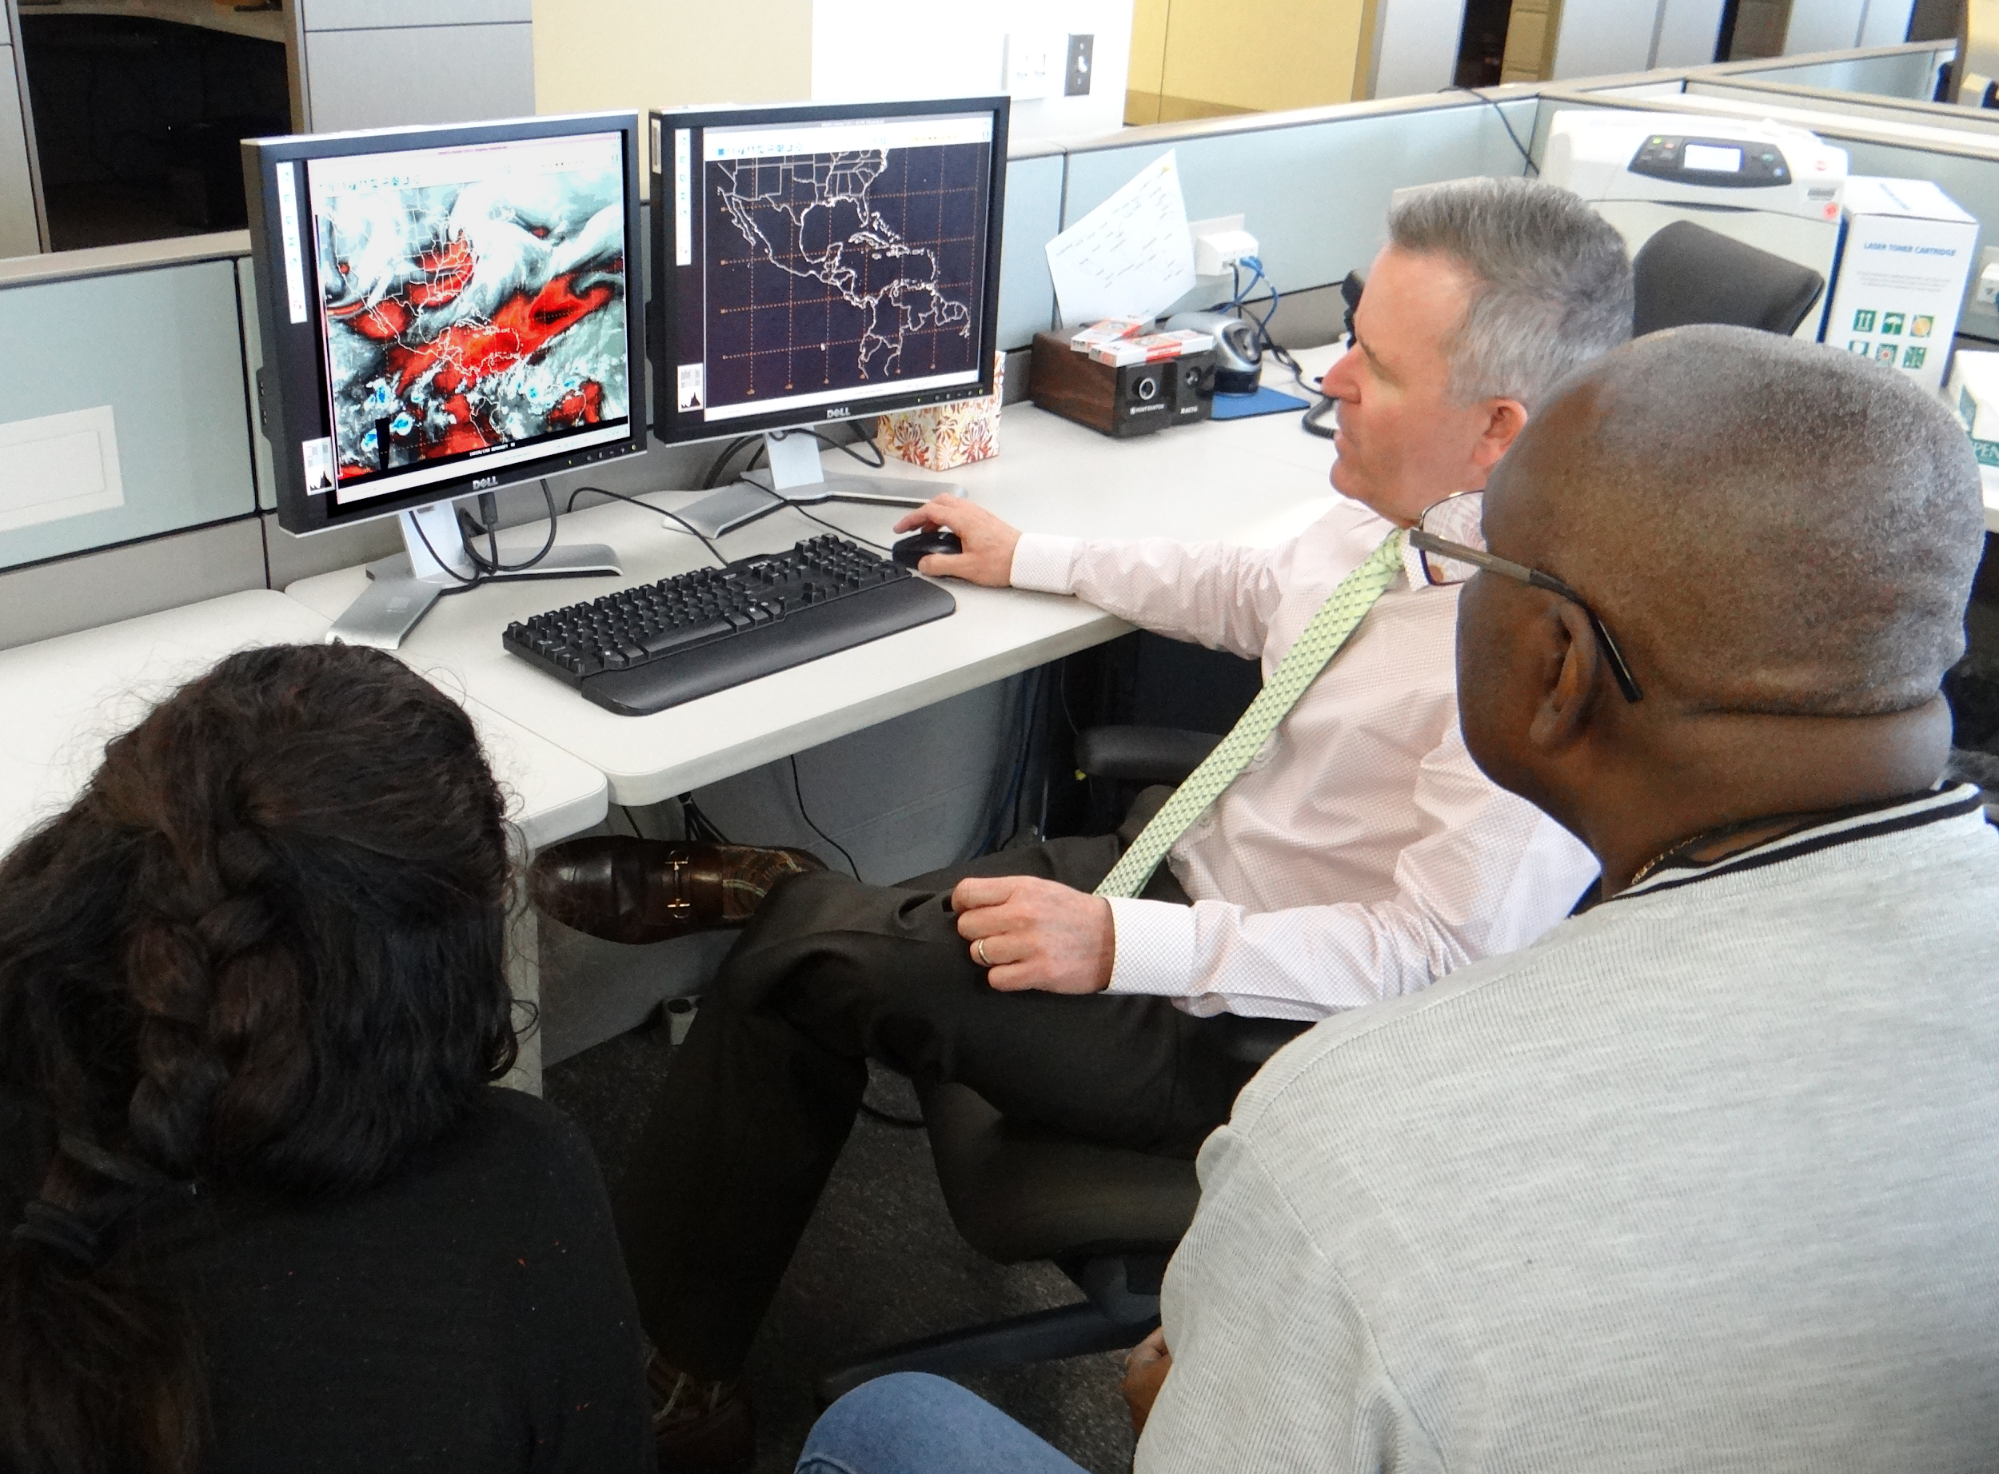 Fig. 1. Mike Davison (at the computer) is seen training Sareti Cardos from Mexico (left) and Earl Hunte from Barbados (right) on the analysis of water vapor imagery, to assess the upper tropospheric synoptic situation and the availability of moisture in the upper atmosphere.